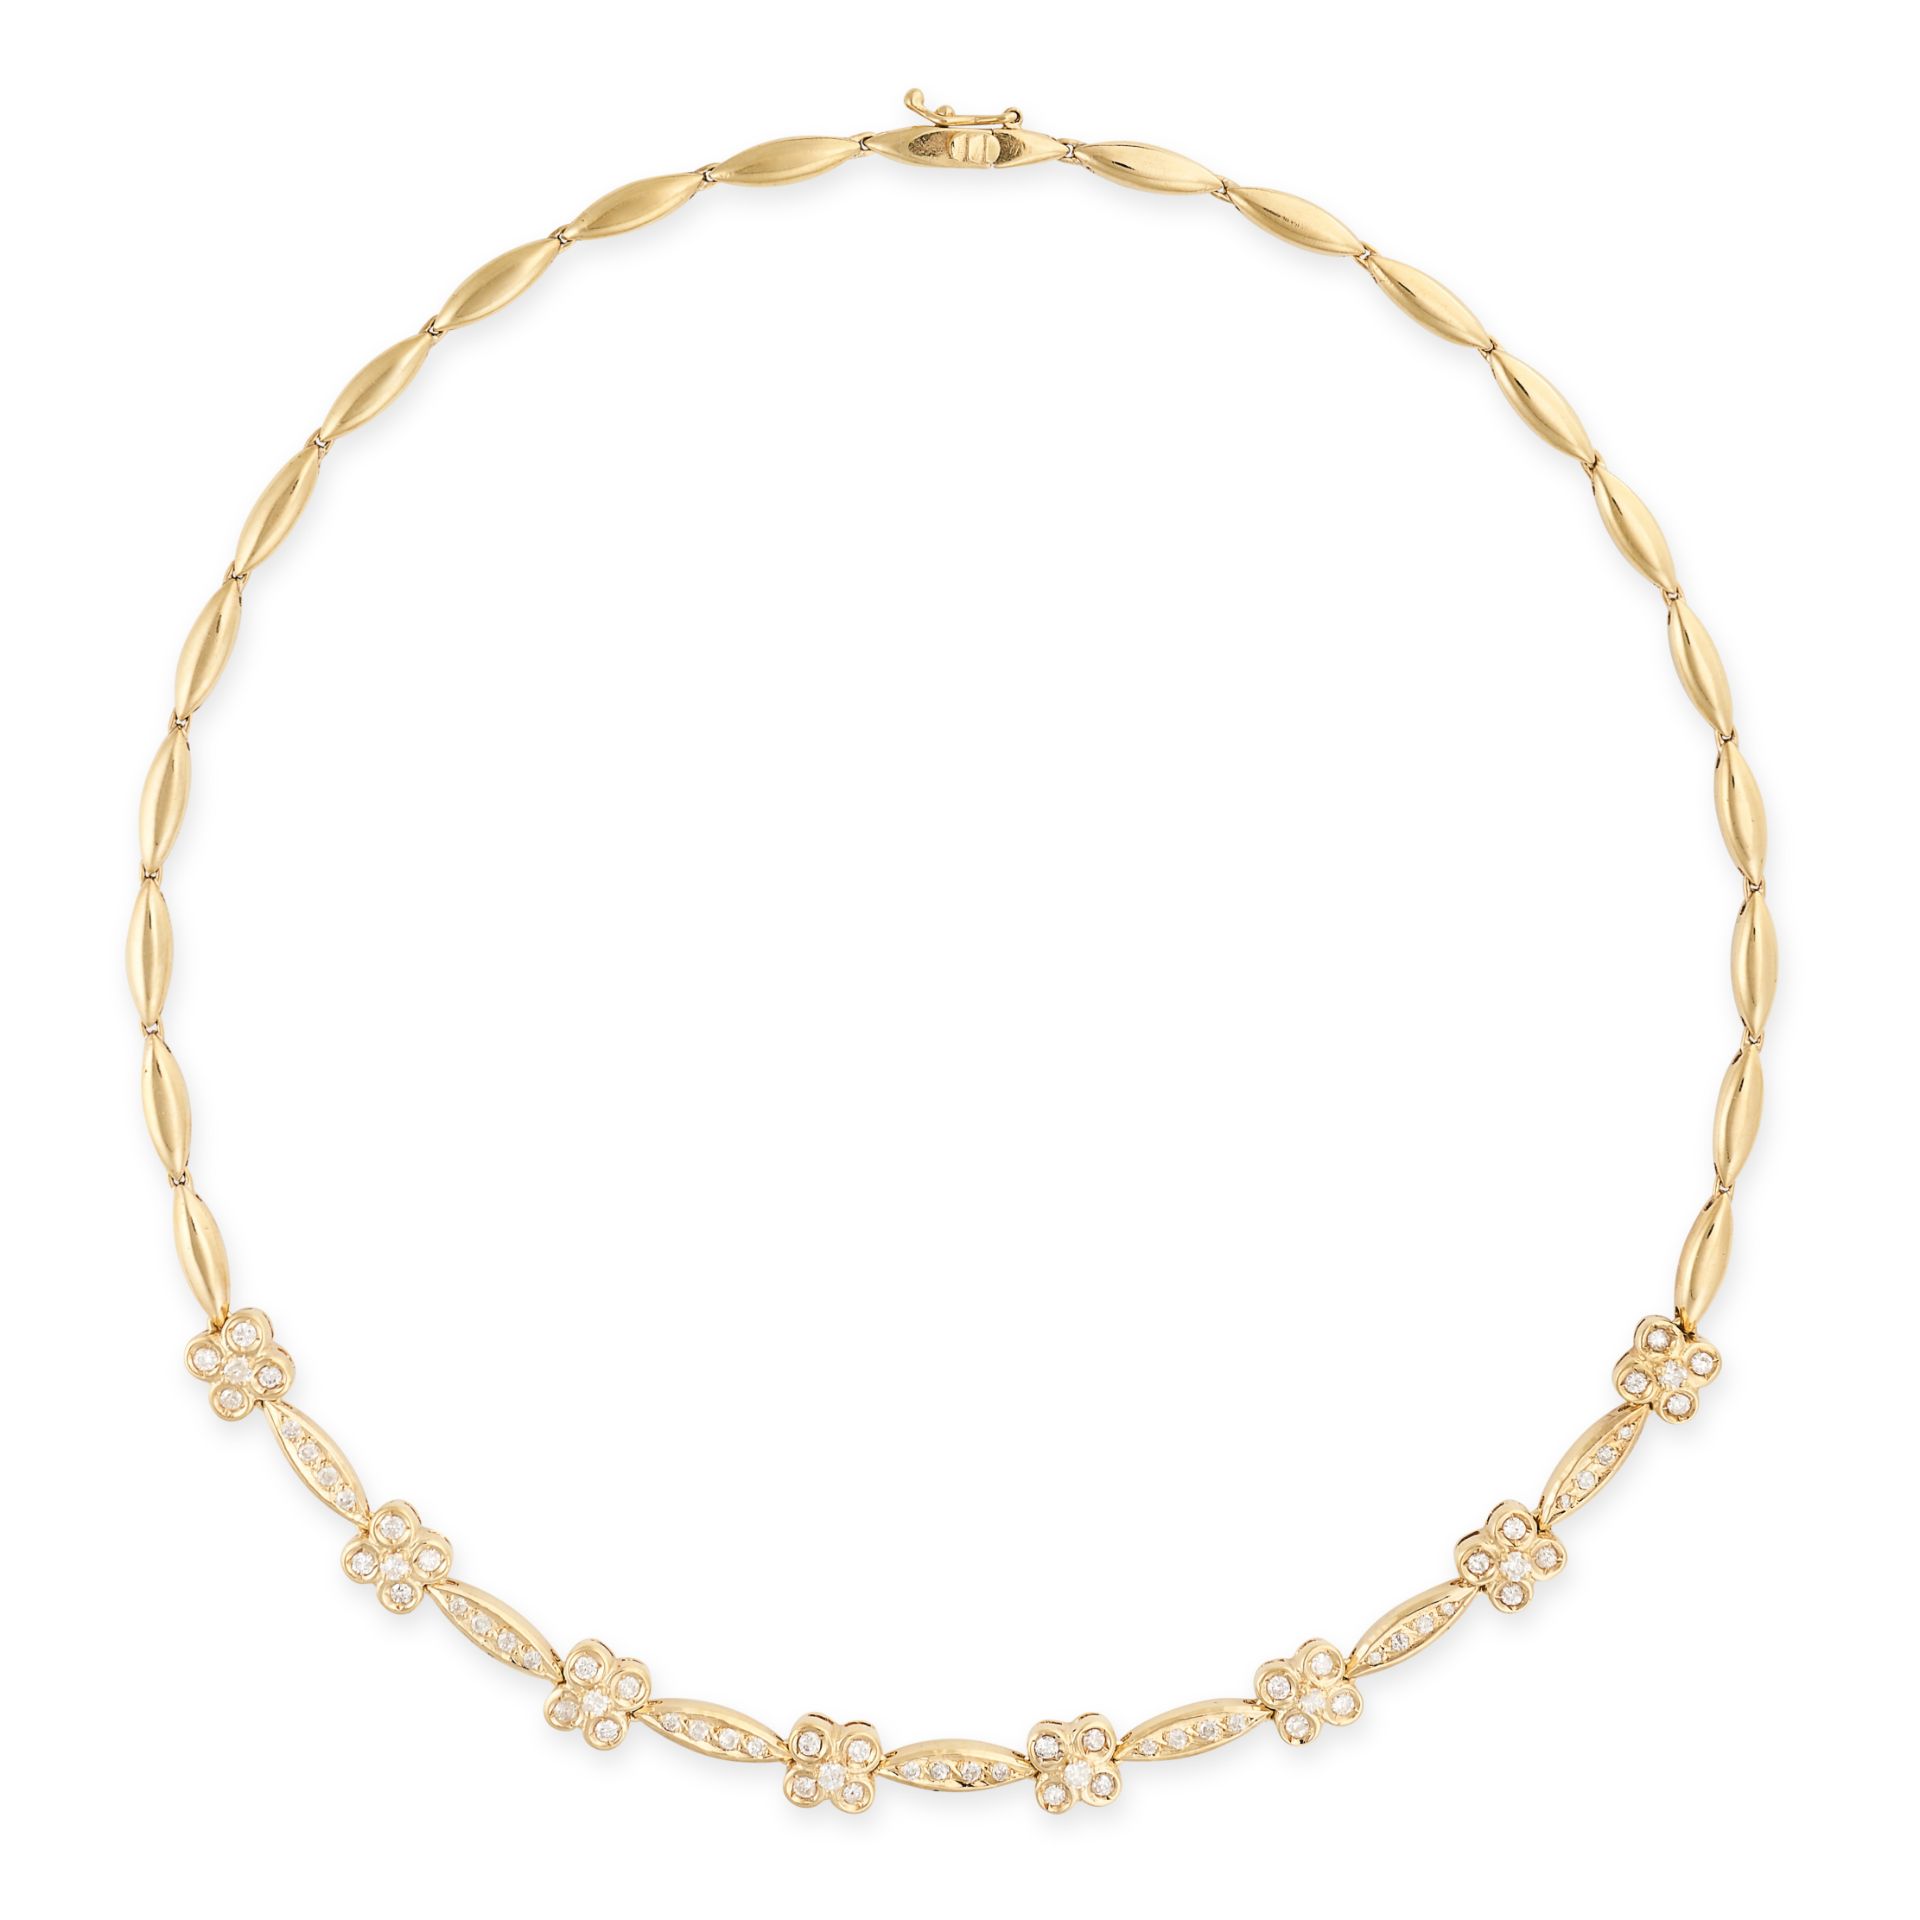 A DIAMOND NECKLACE in 18ct yellow gold, comprising eight clusters of round cut diamonds accented